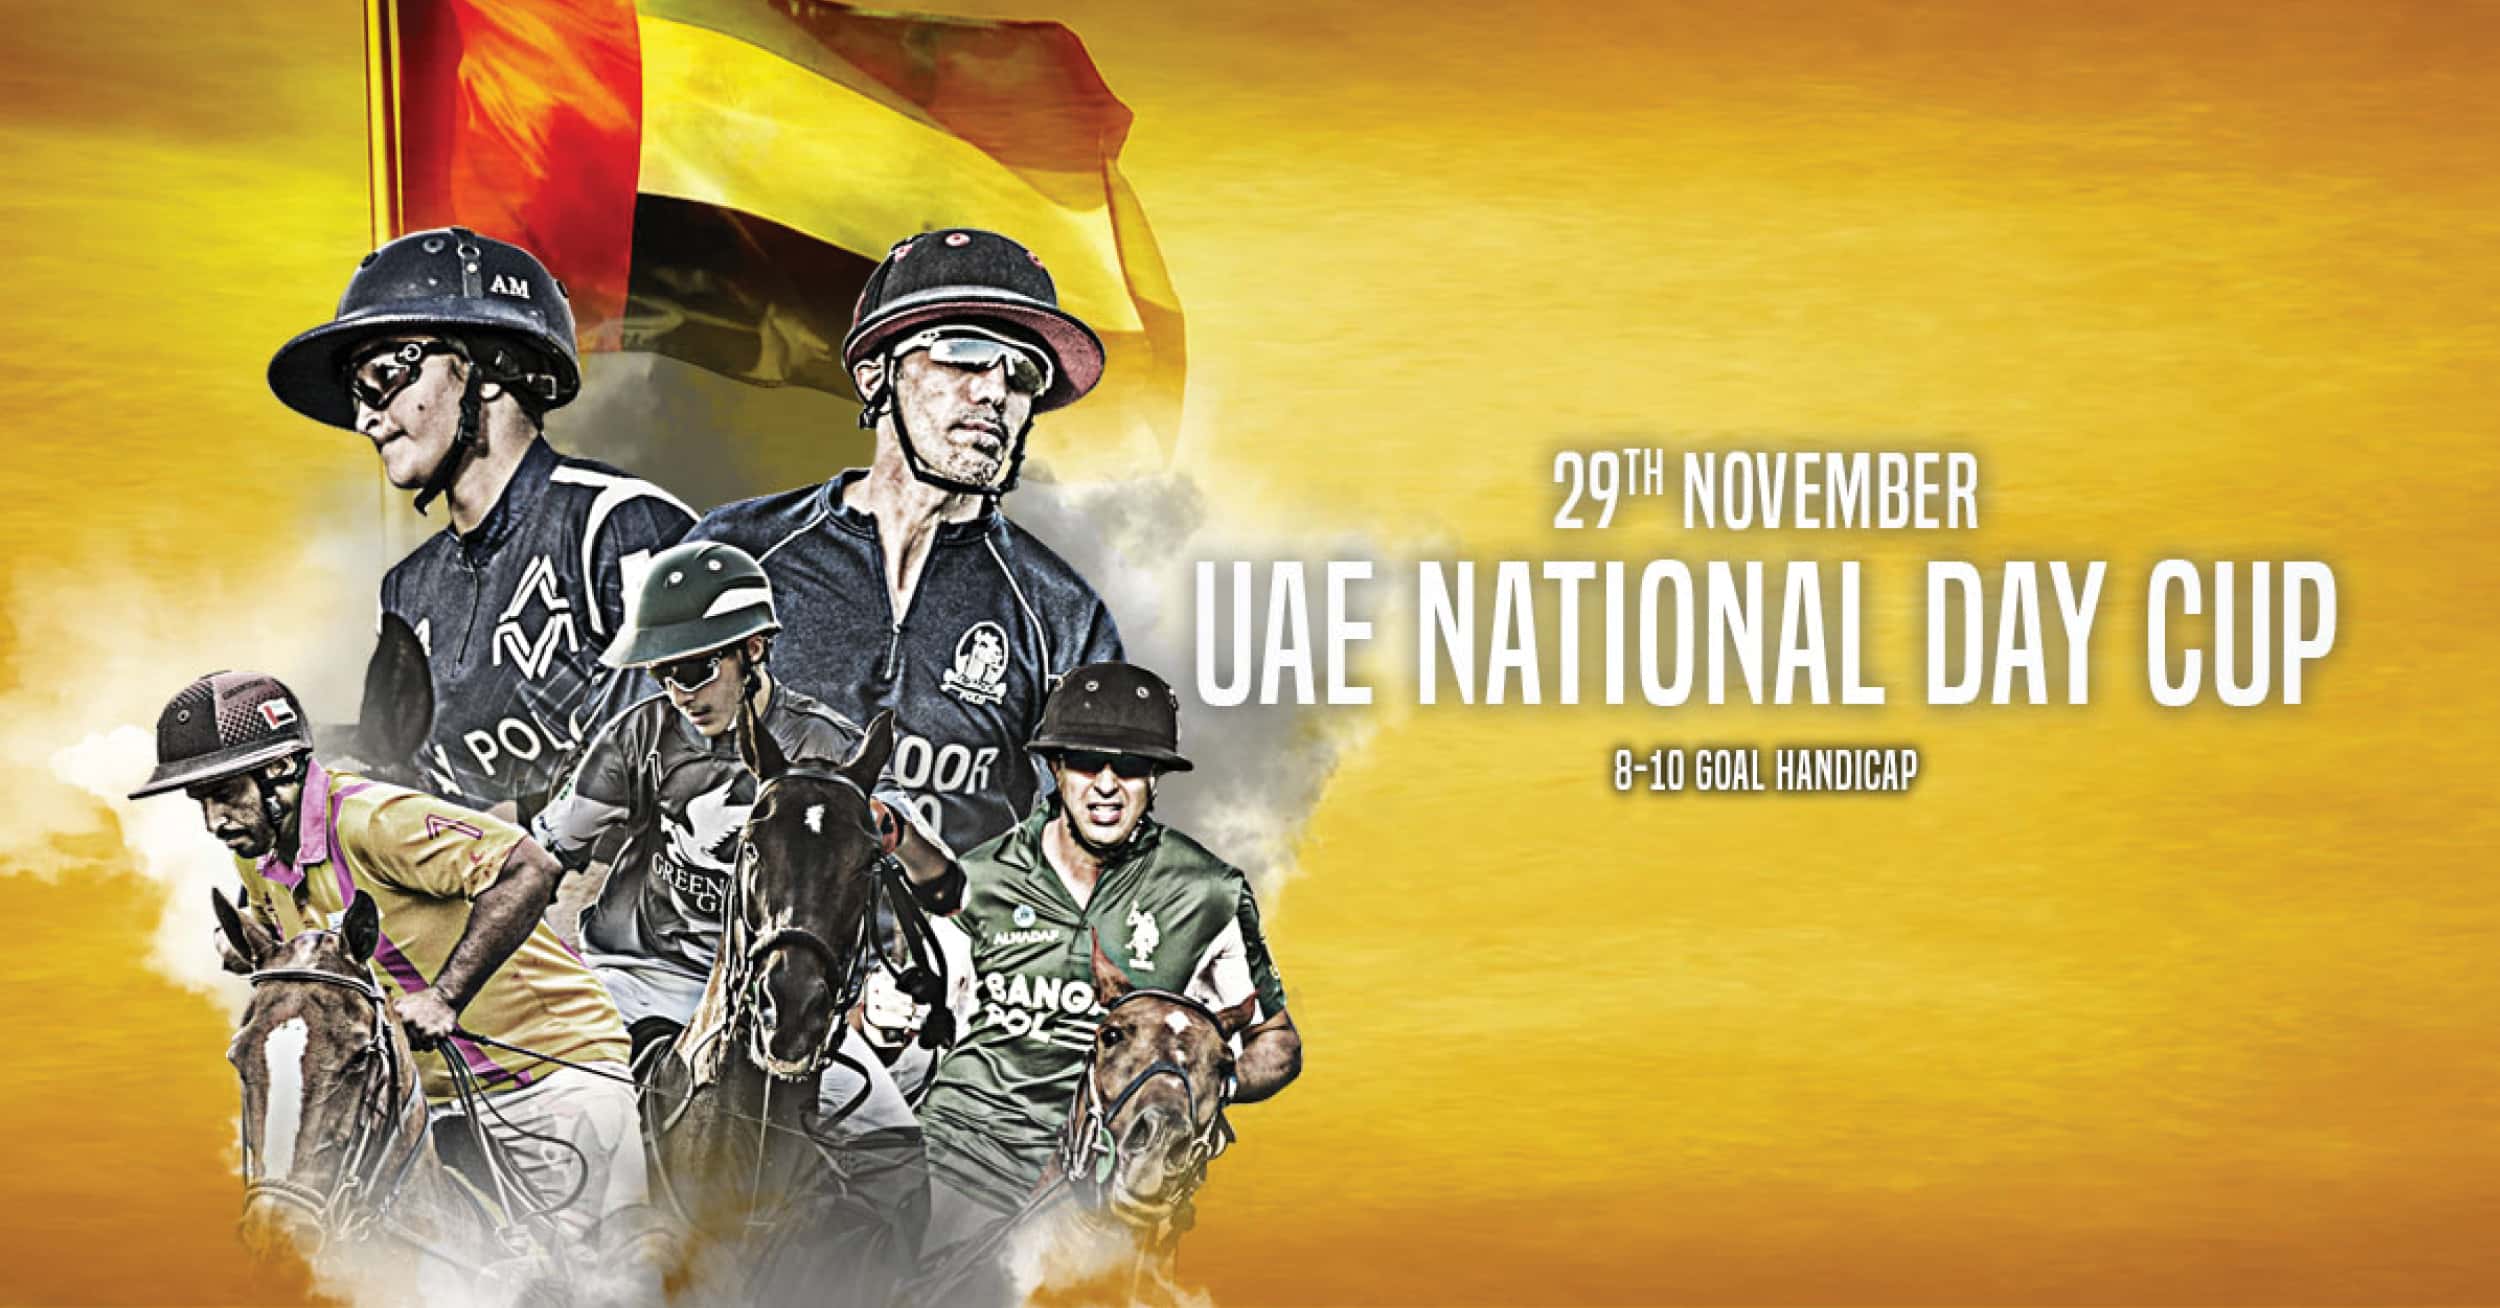 UAE National Day Cup 2019